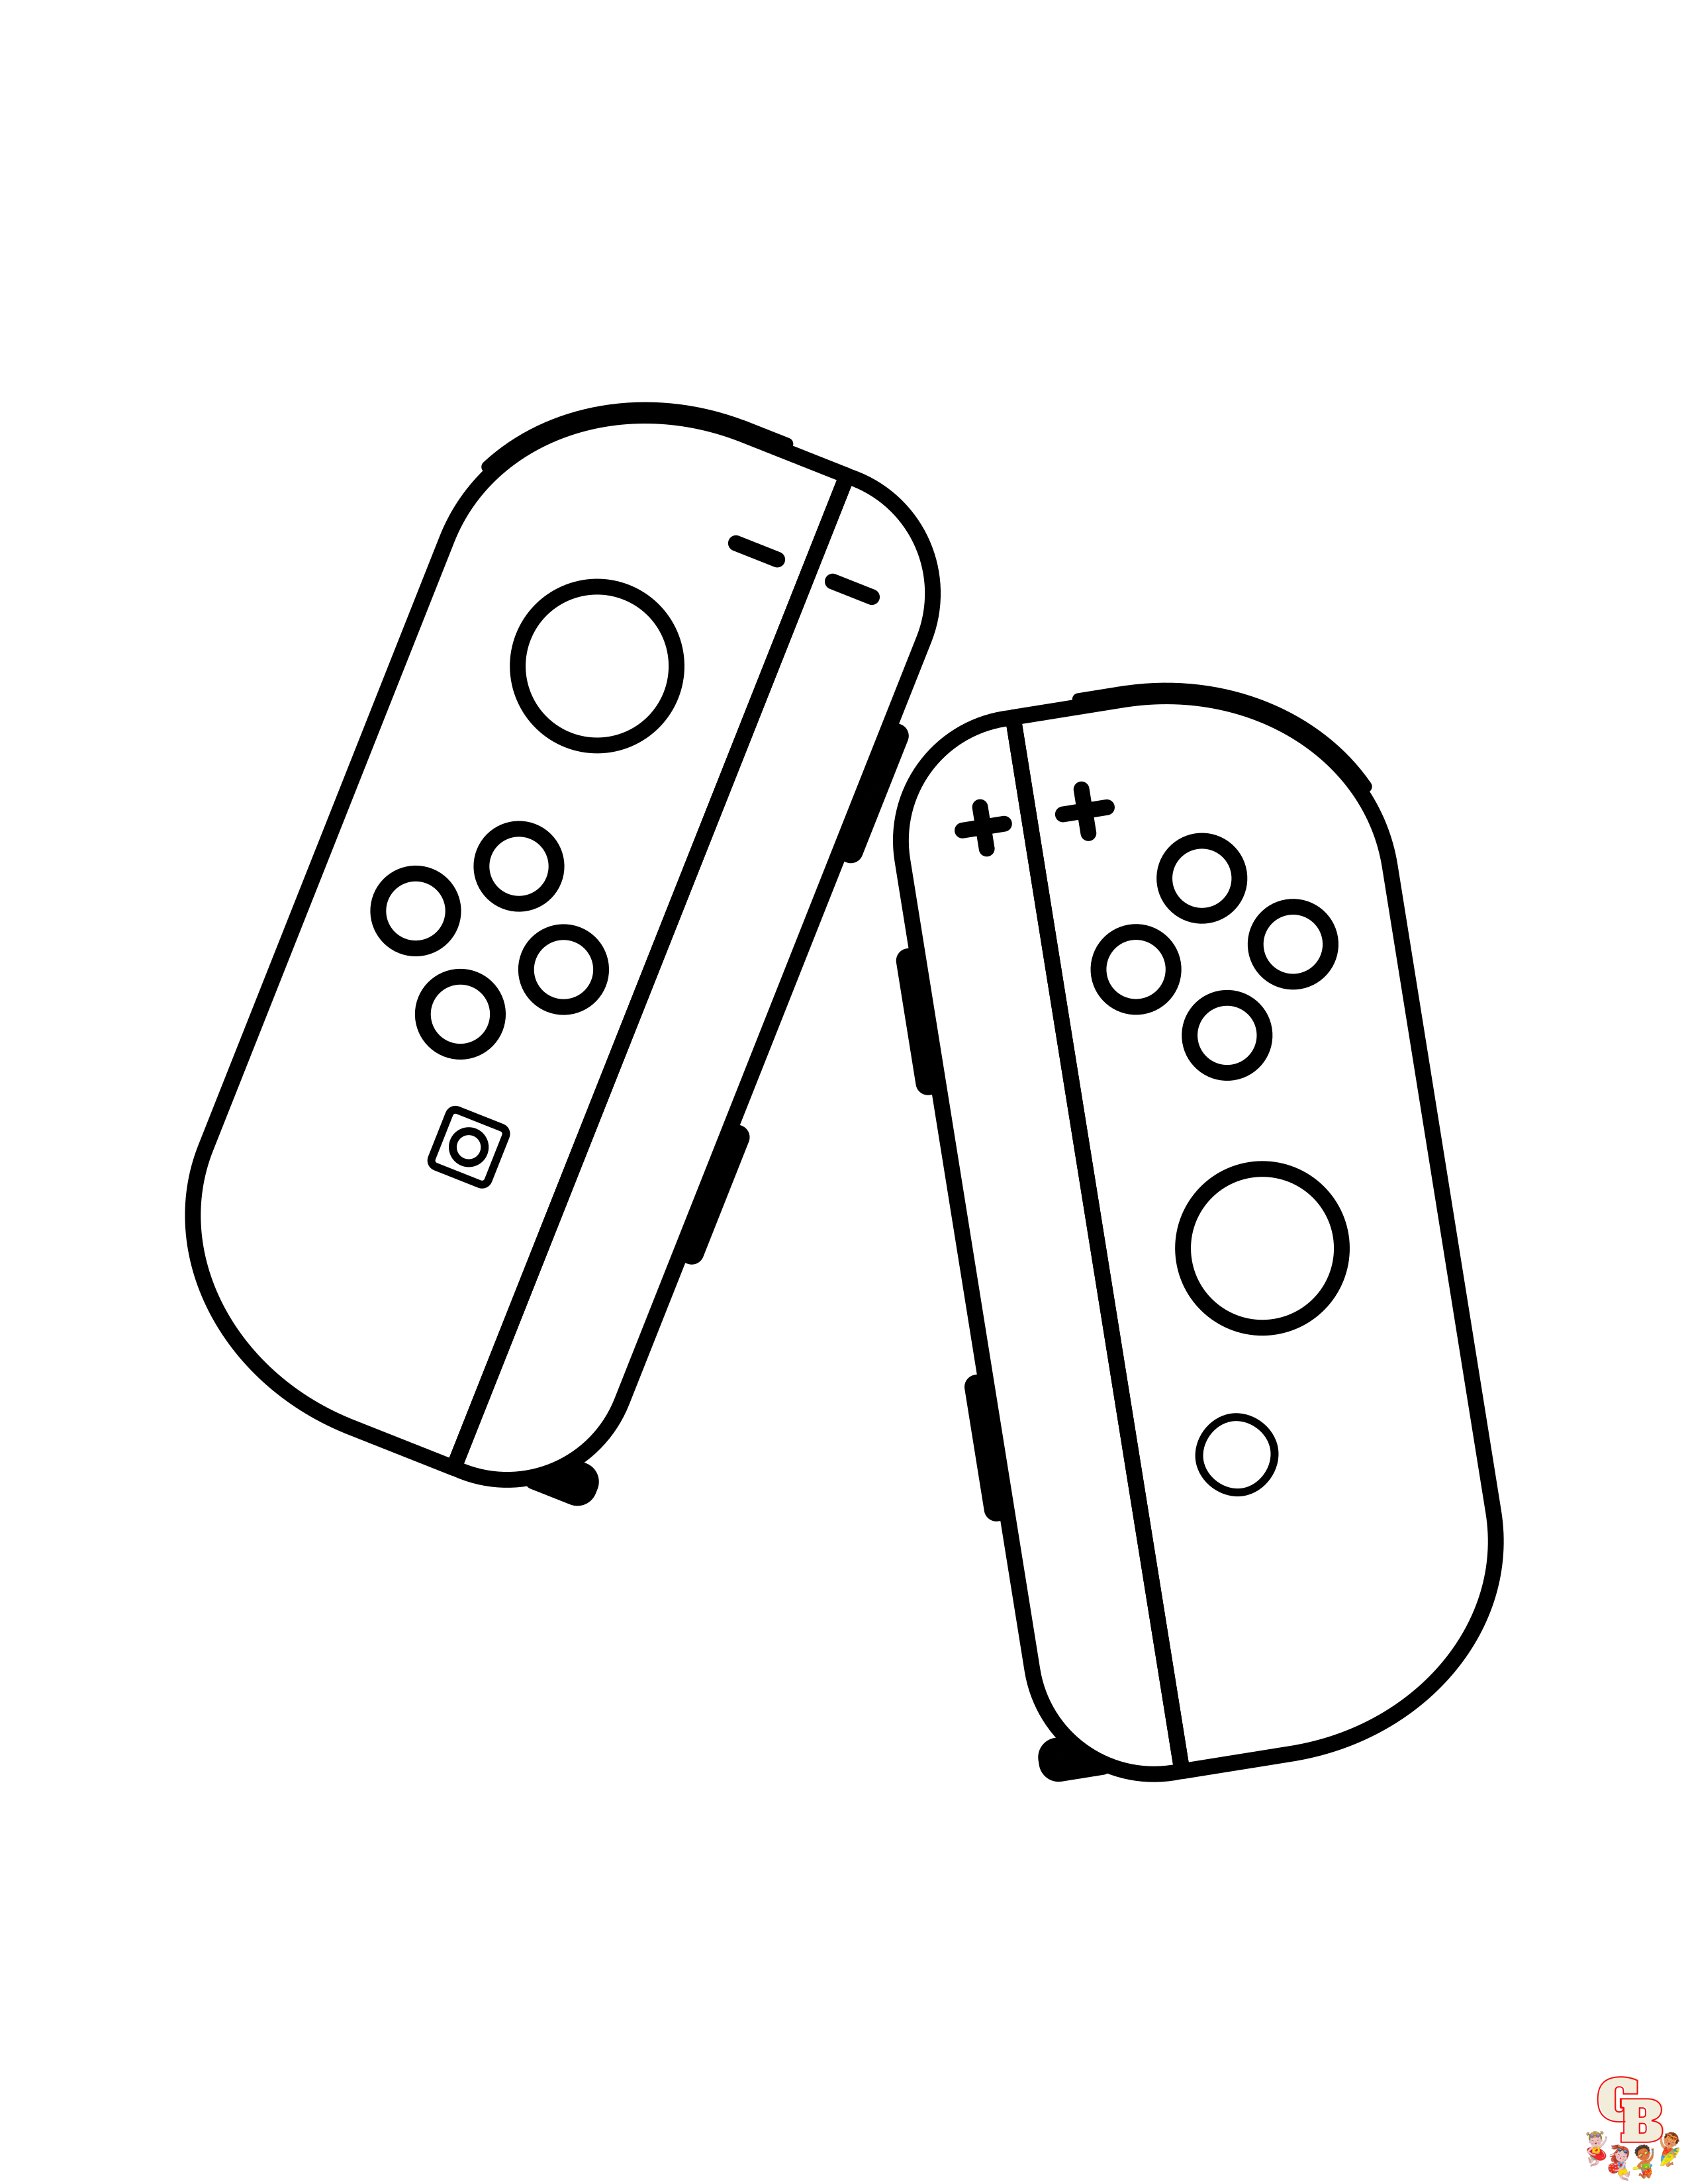 Nintendo Switch Coloring Pages 1